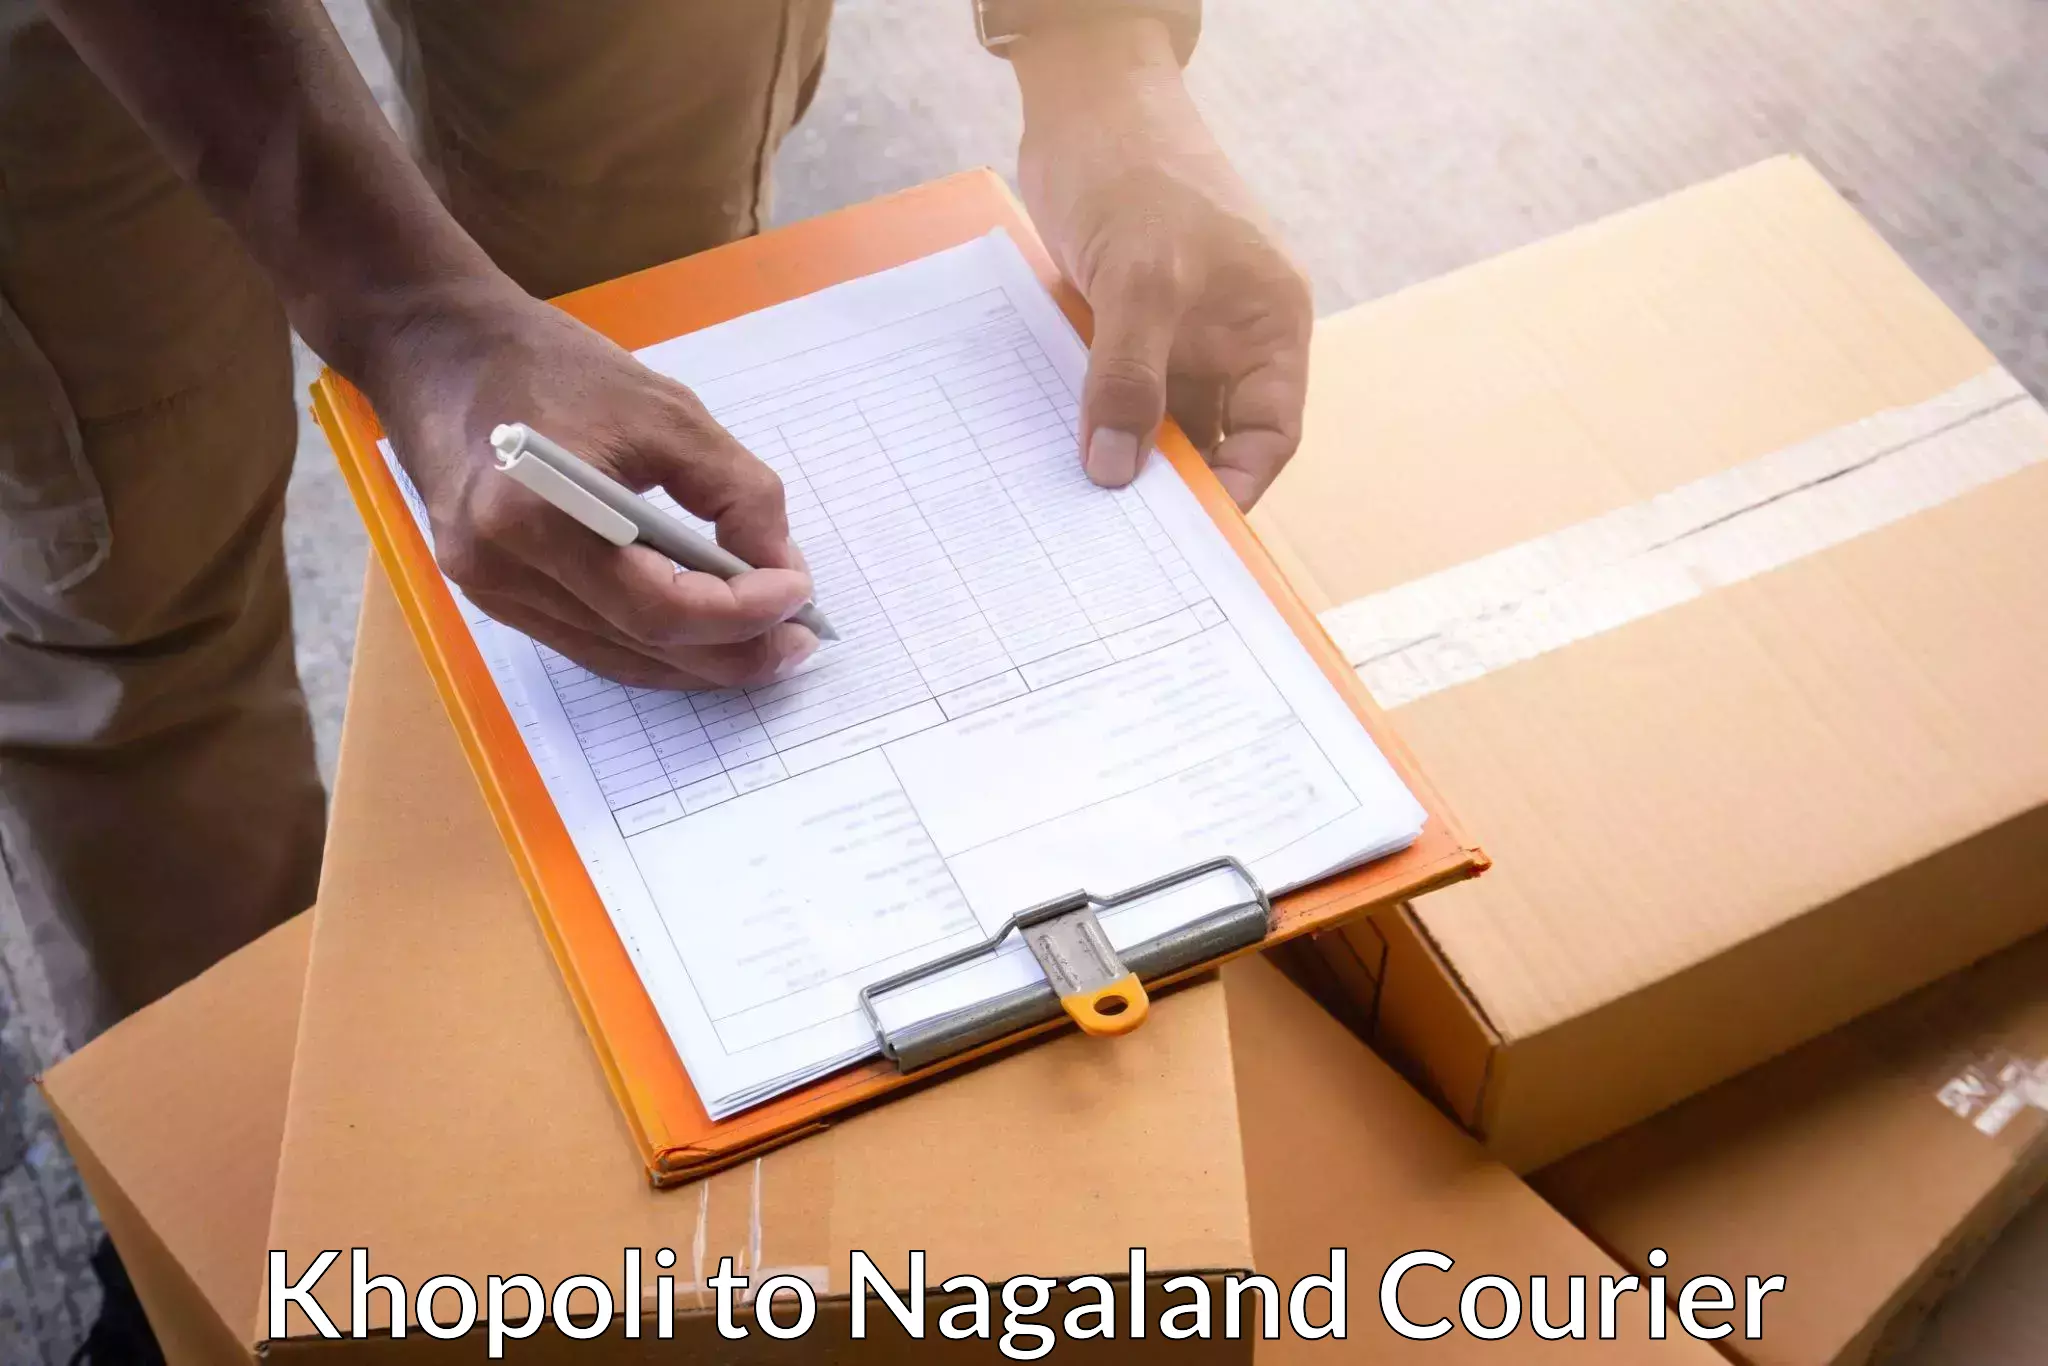 Overnight delivery services in Khopoli to Nagaland